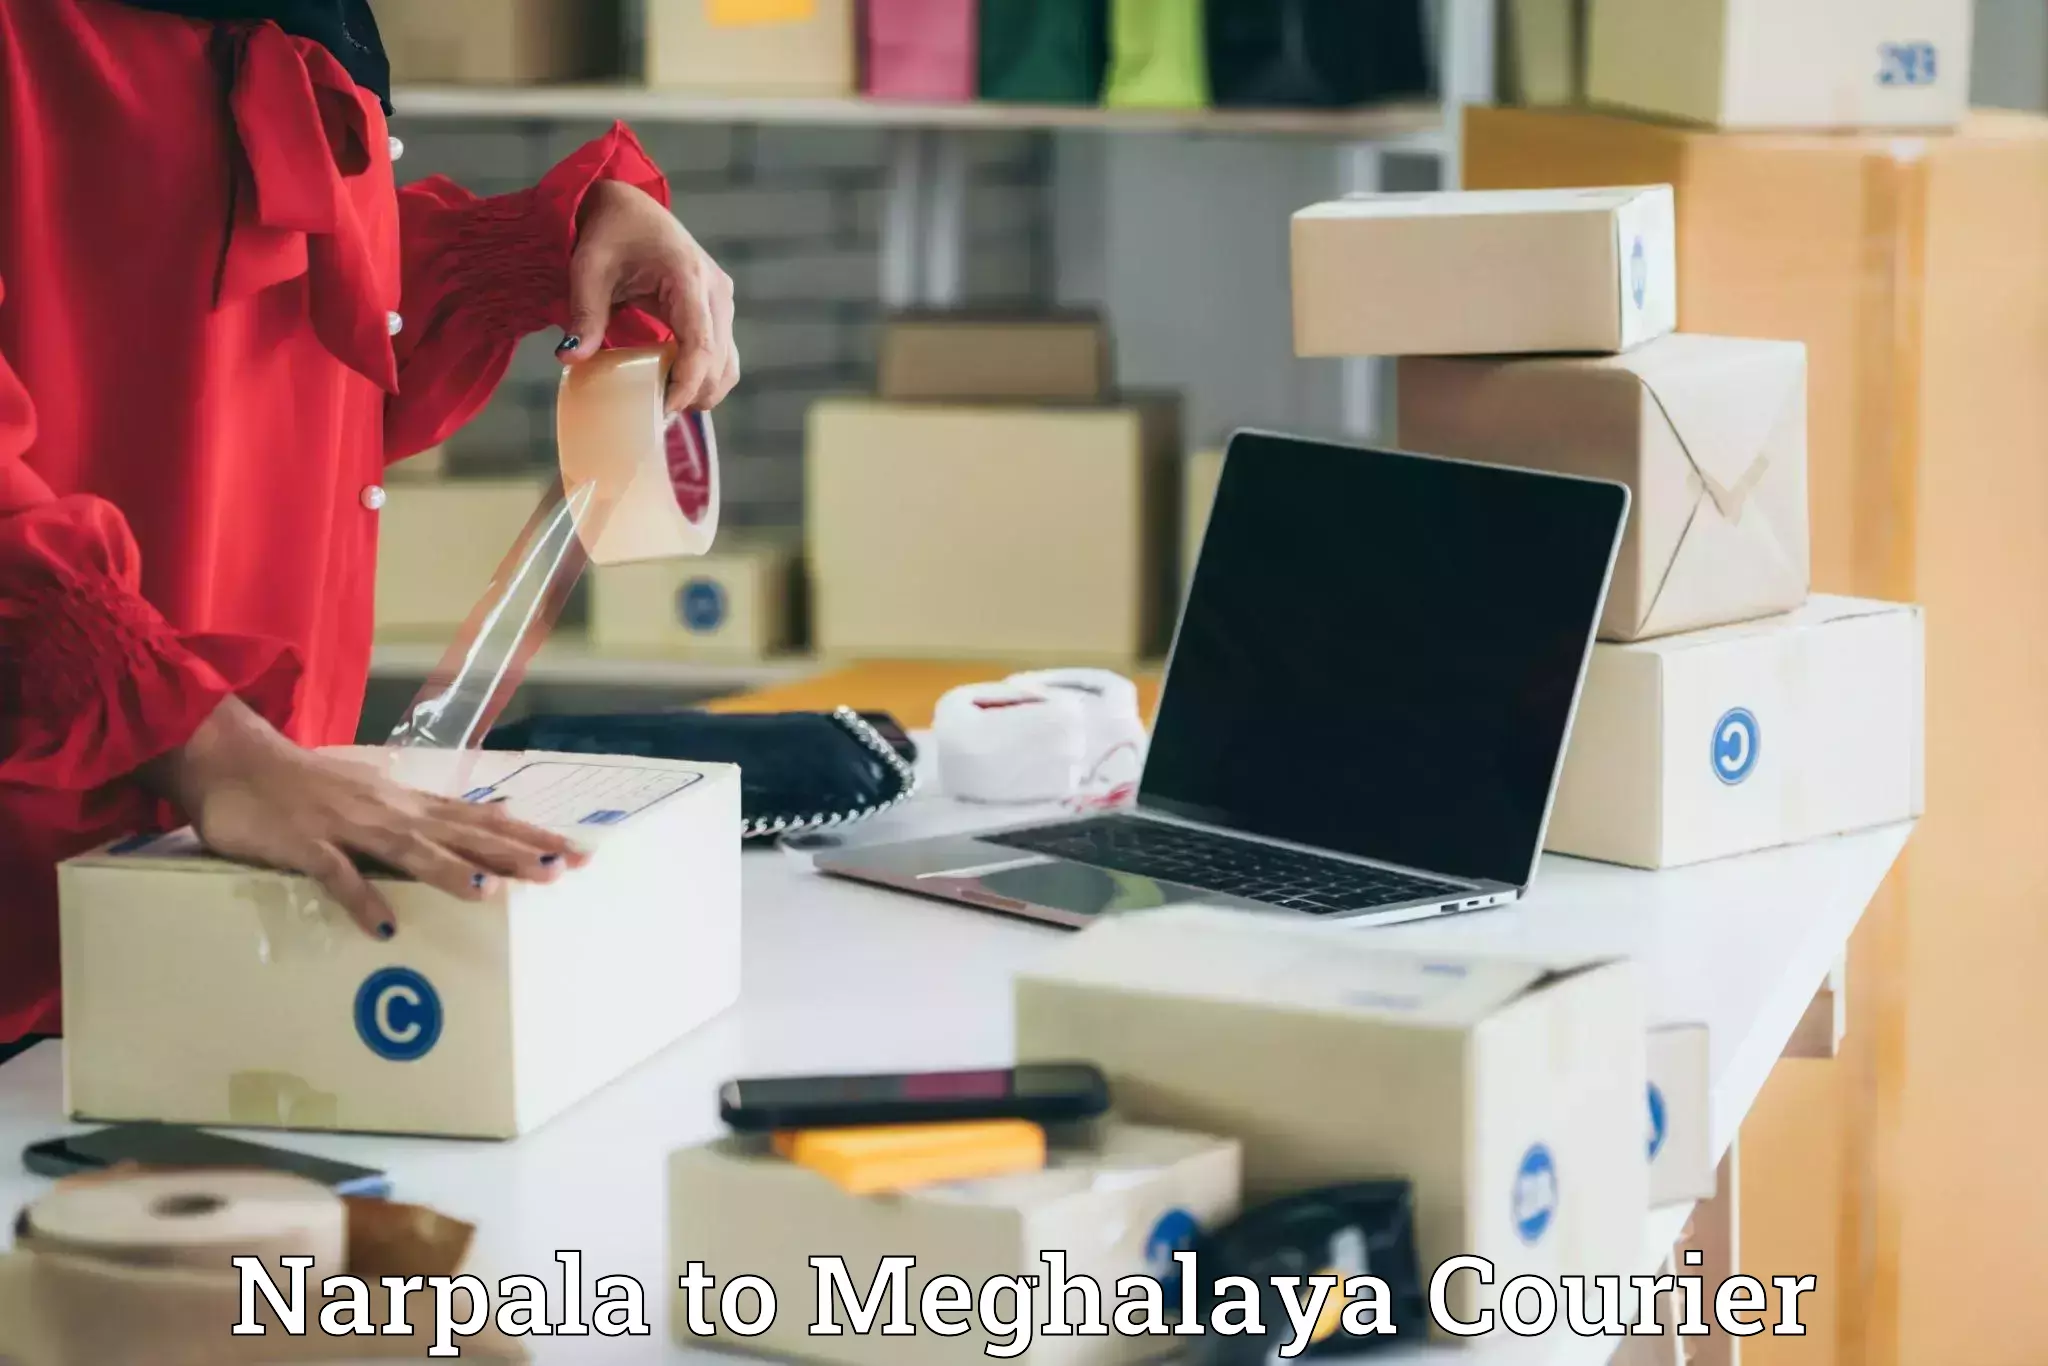 Efficient order fulfillment Narpala to Tura